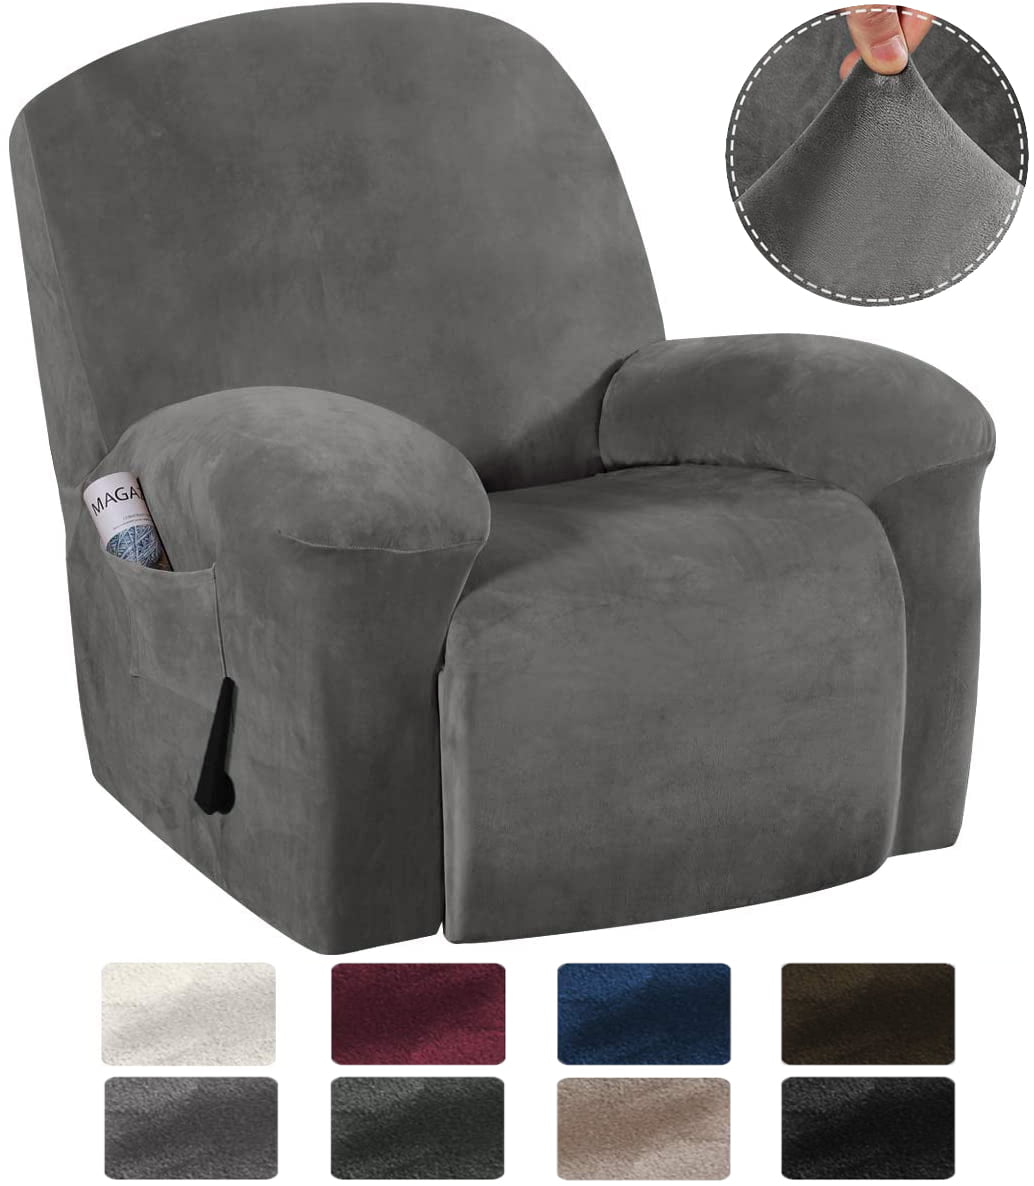 Stretchable Slipcover for Recliner Chair,Furniture Protector,with Storage Pocket 